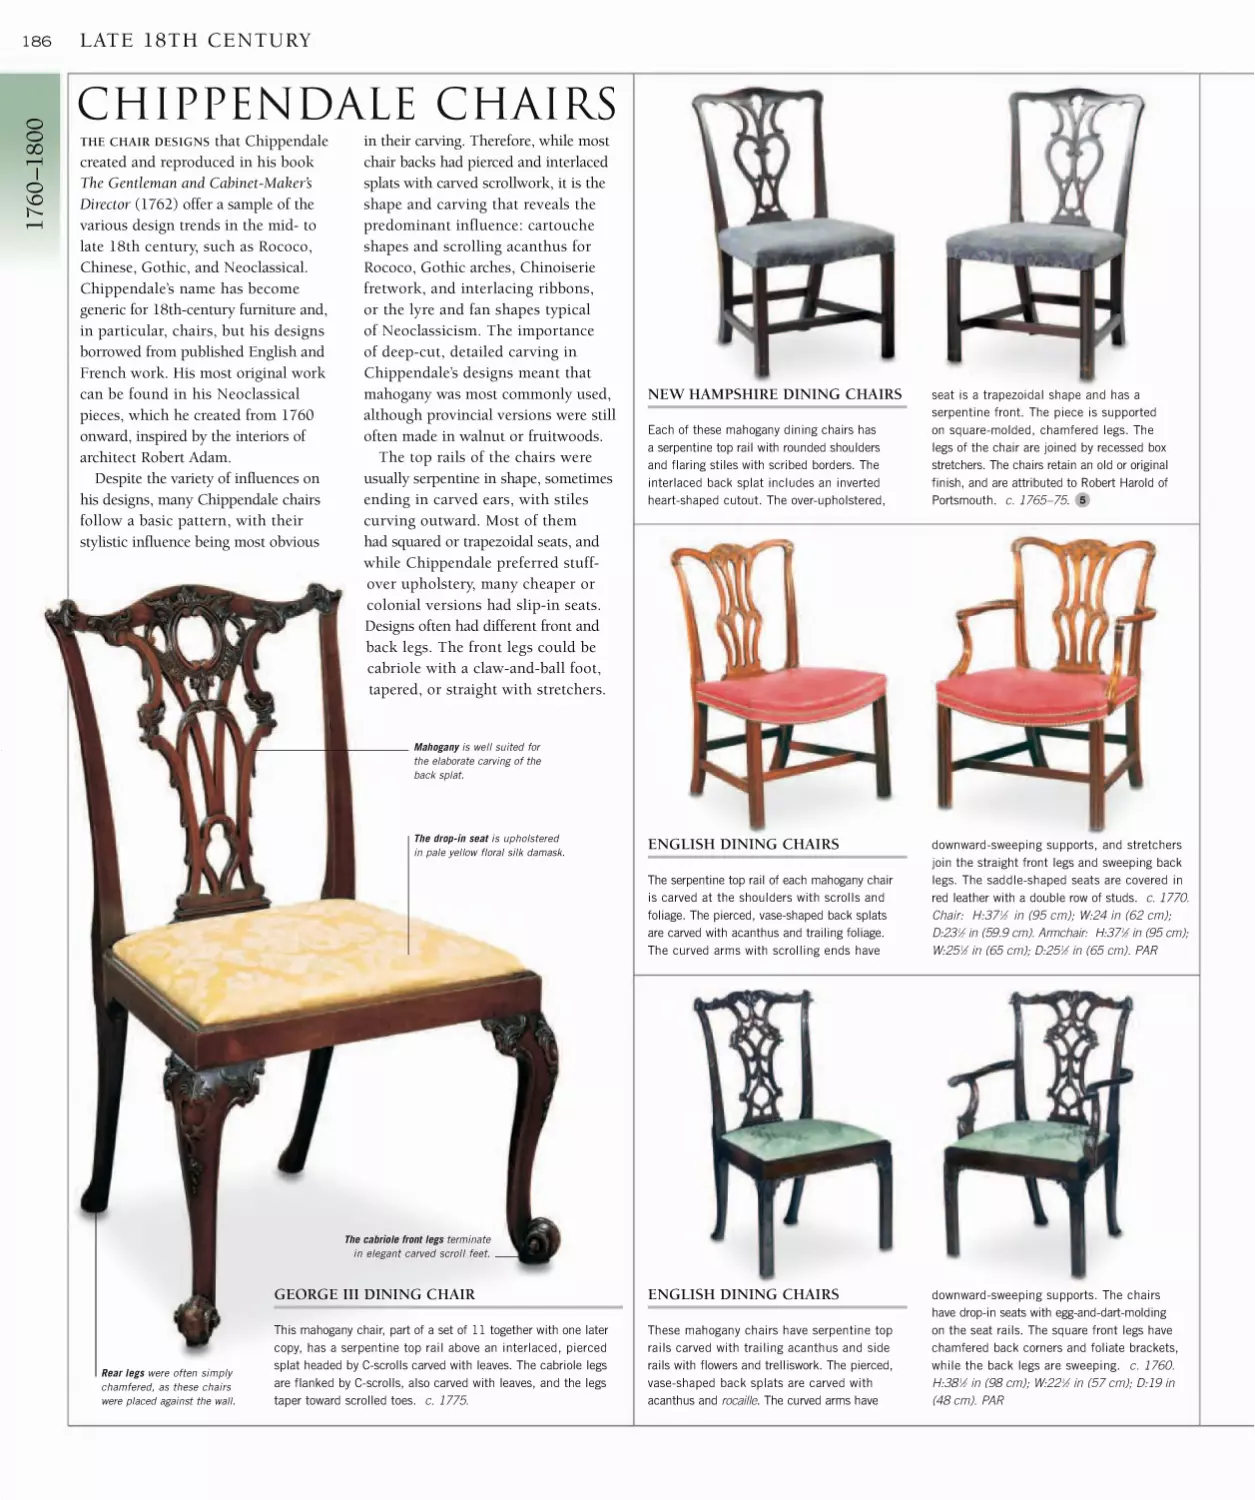 186 Chippendale Chairs